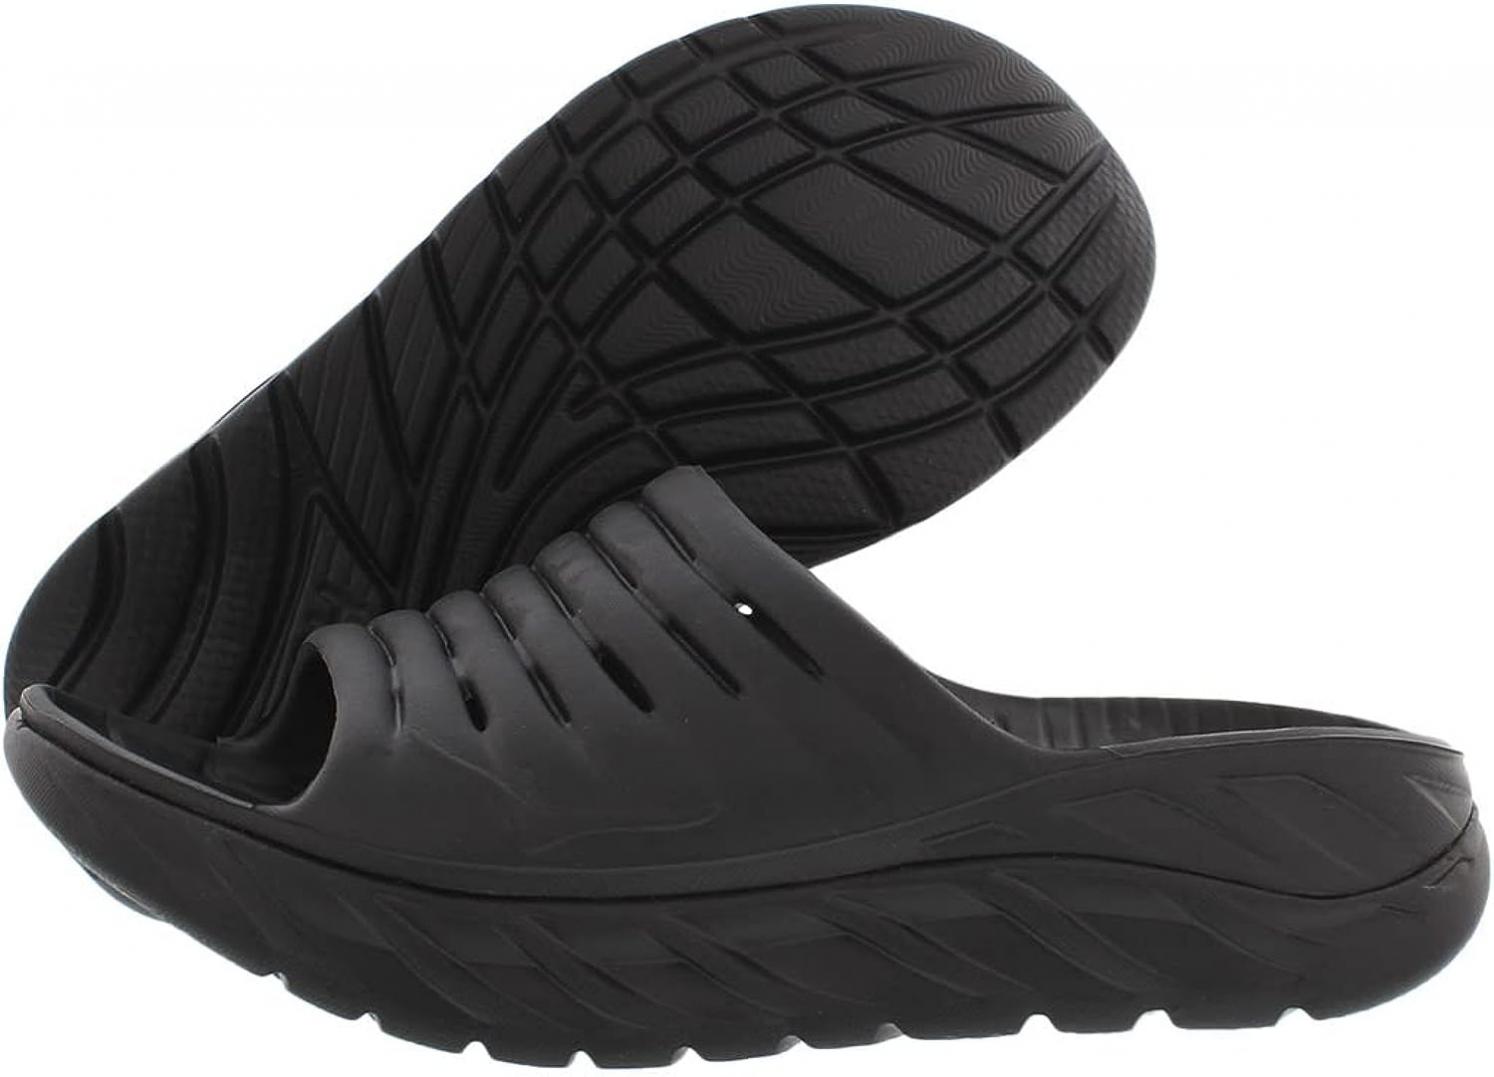 HOKA ONE ONE Ora Recovery Womens Sandals Size 7, Color: Black/Black